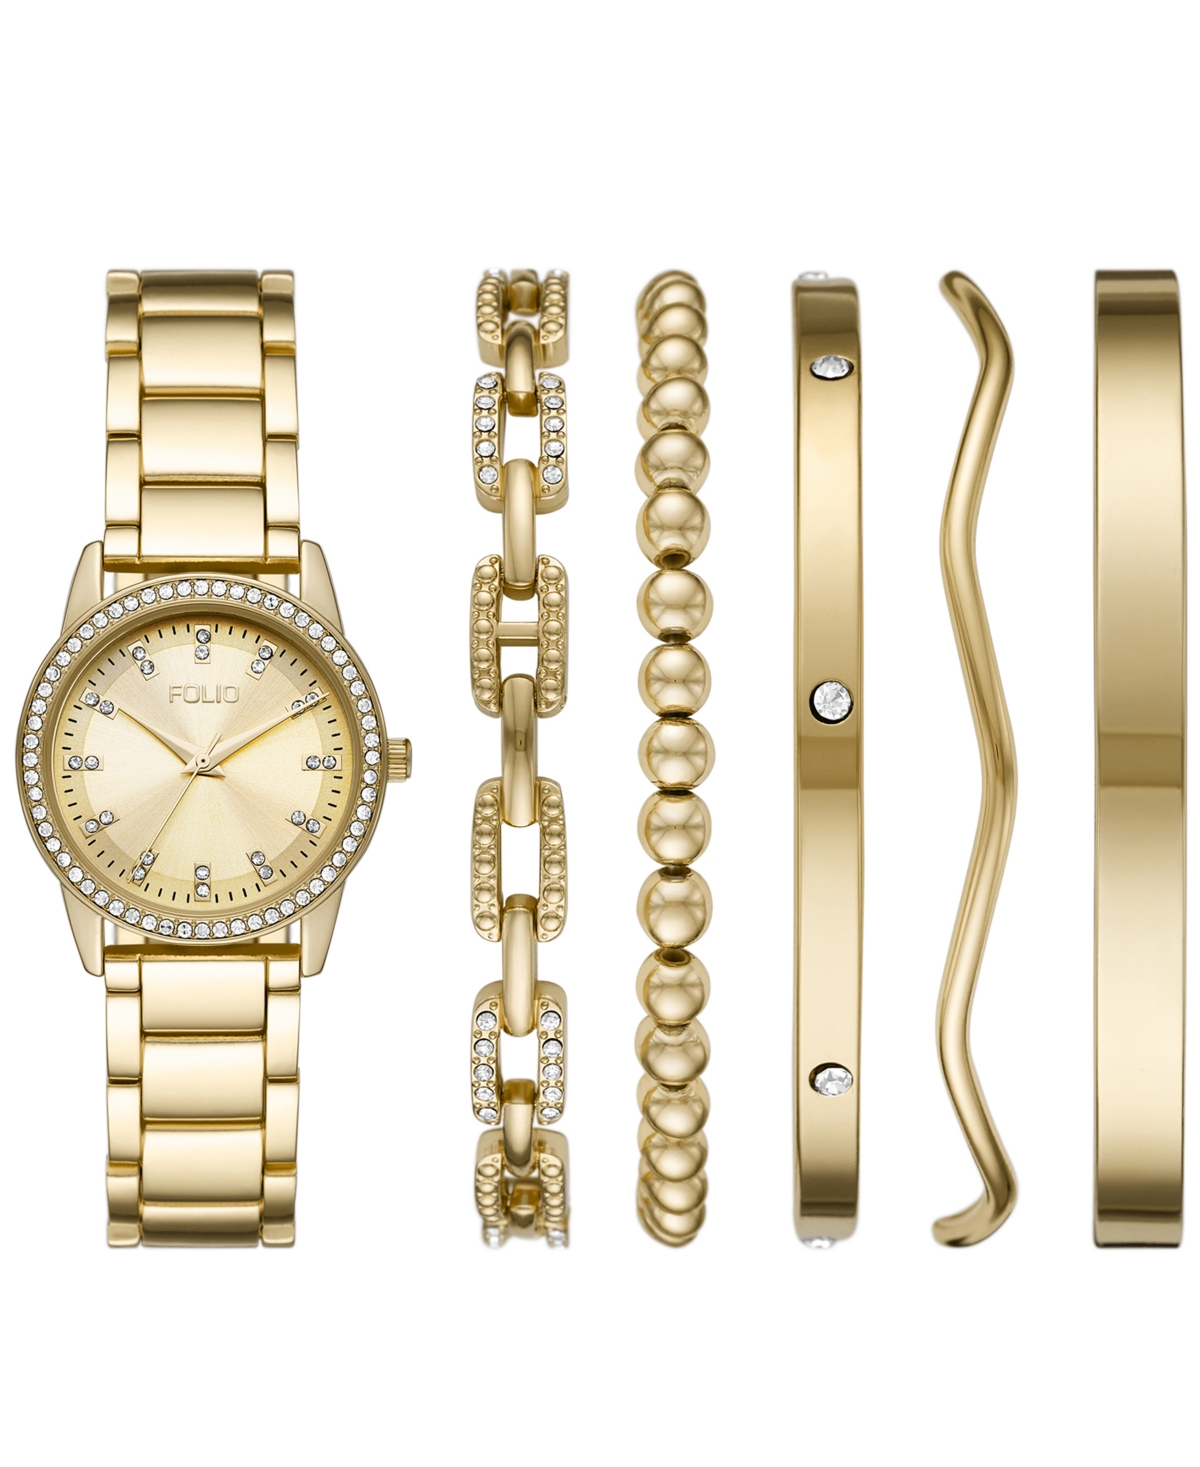 Folio Women's Three Hand Gold-Tone 34mm Watch and Bracelet Gift Set, 6 Pieces